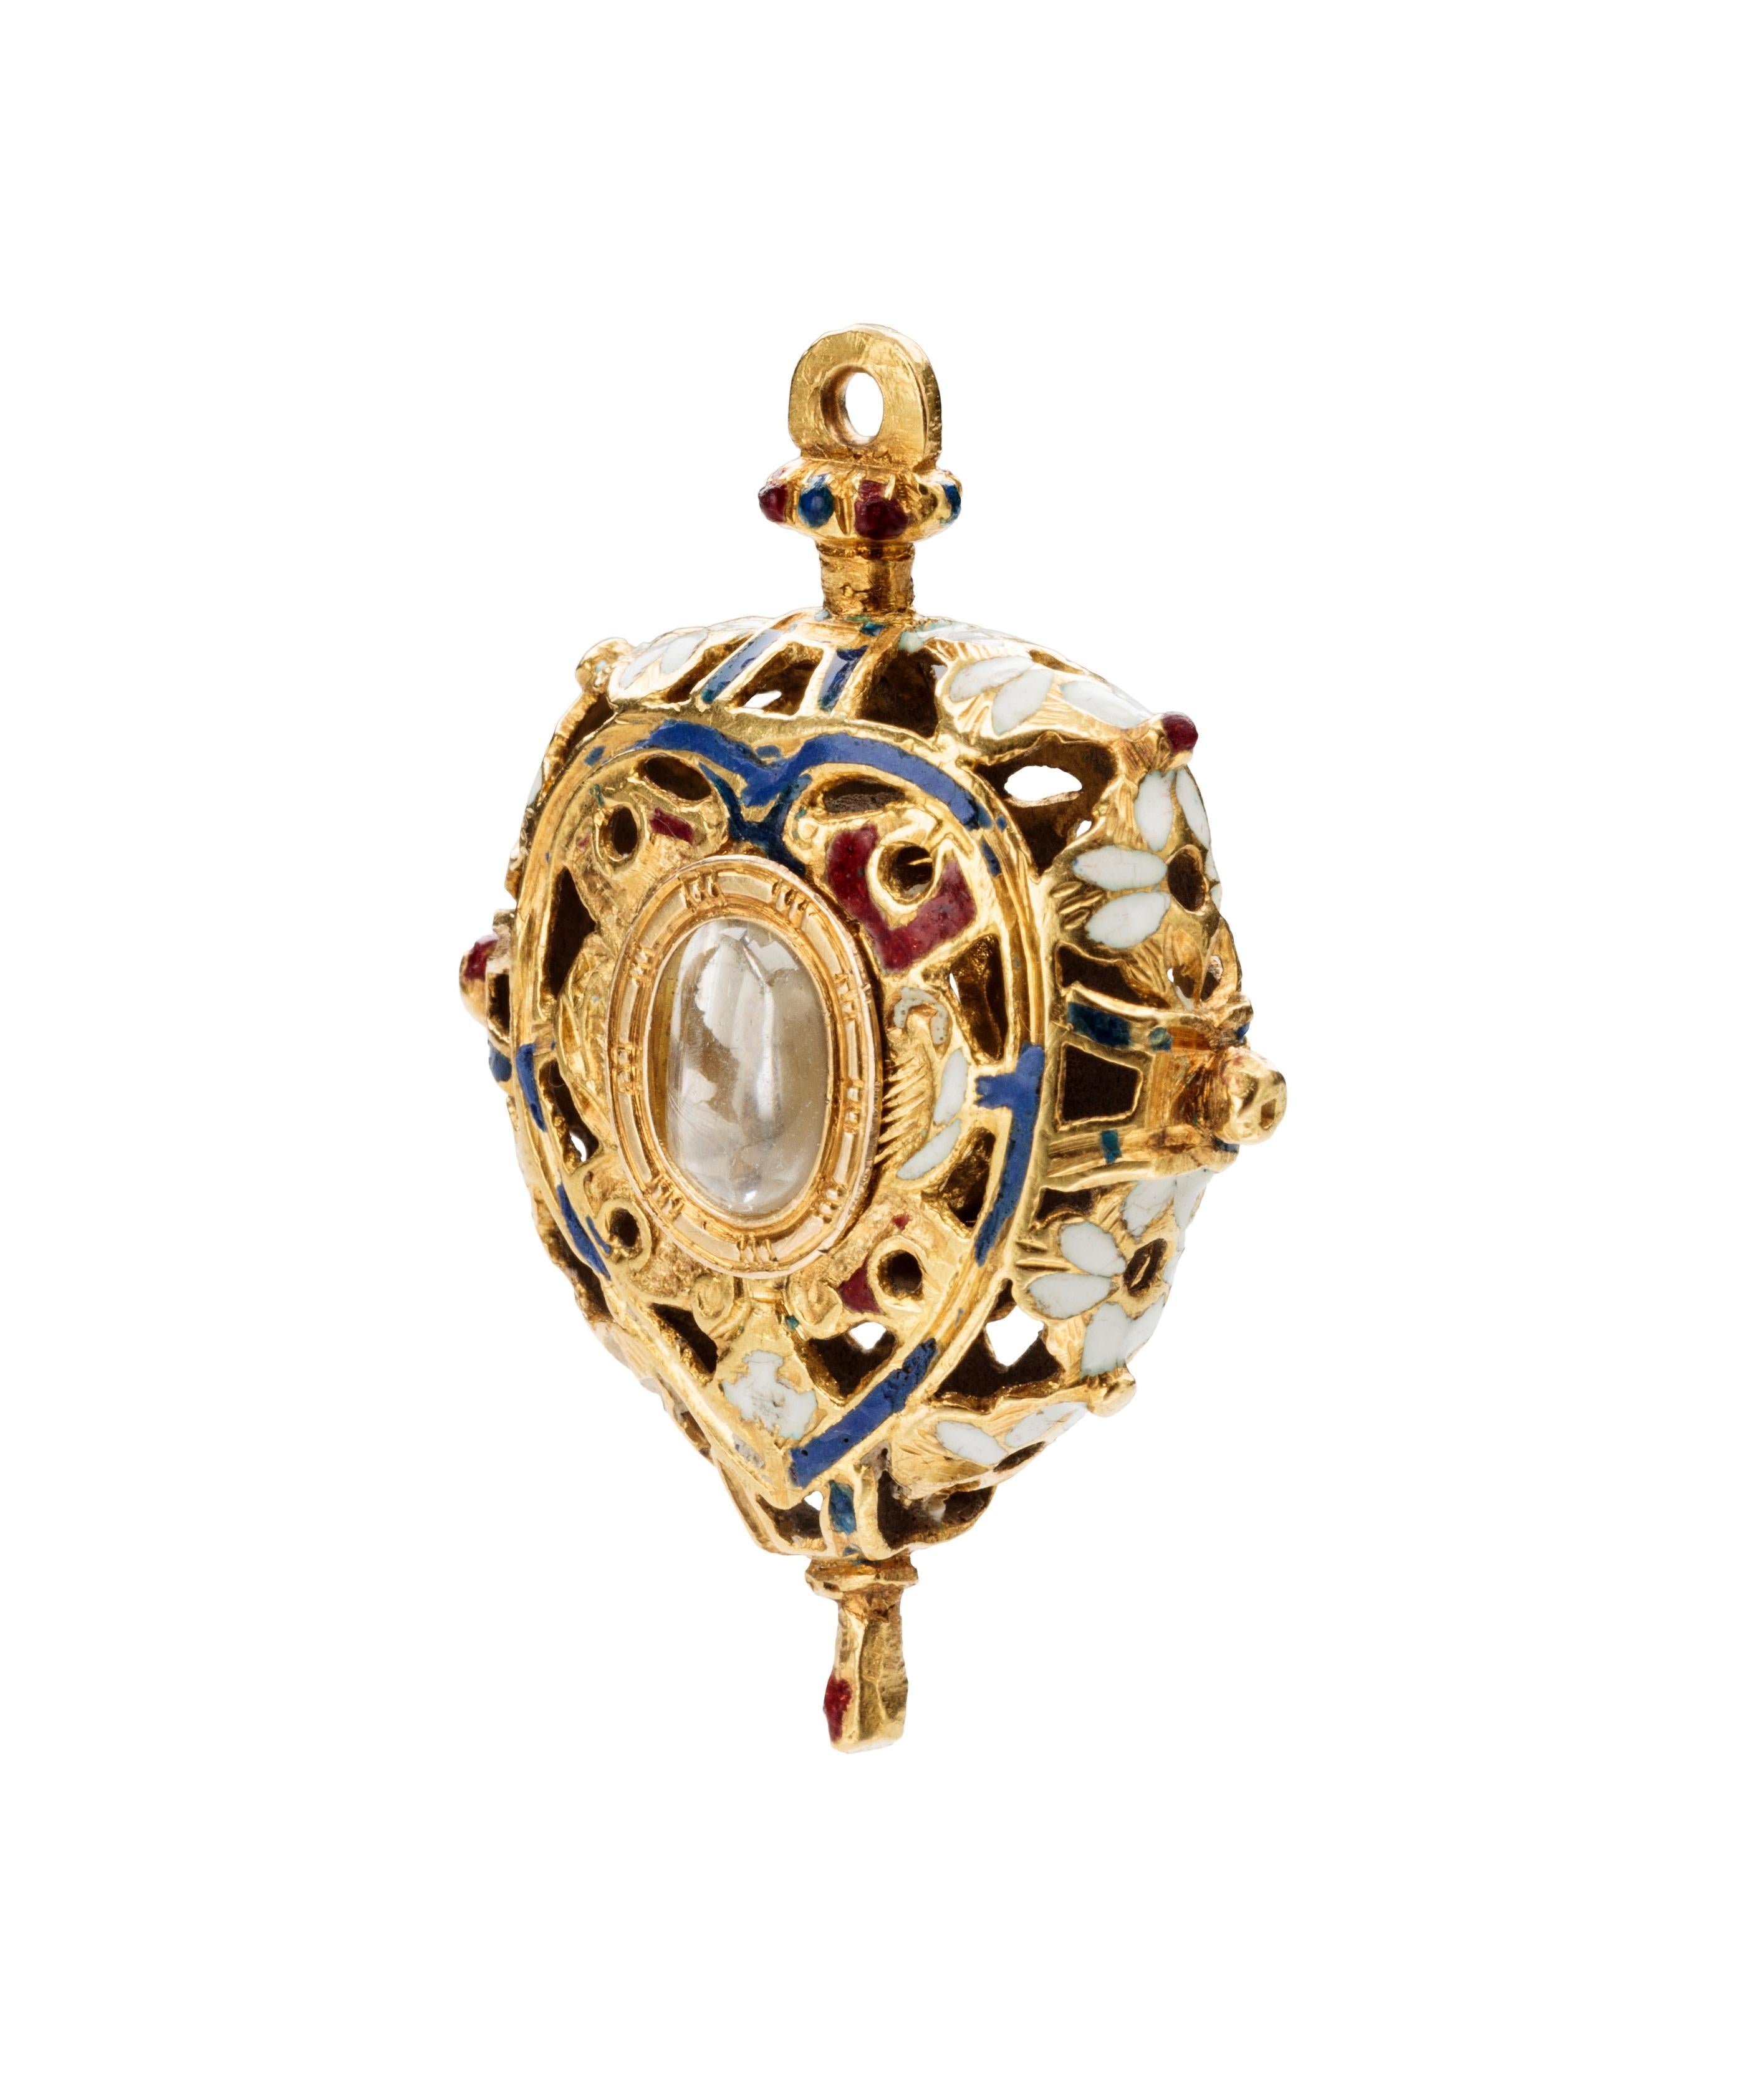 Renaissance Heart Pendant
Spain or Italy, c. 1600 
Gold, enamel, glass 
Weight 17.2 grams; dimensions 45 × 31.4 × 13.8 mm 

Double-sided heart-shaped pendant in gold and enamel openwork. A blue enameled frame surrounds an oval capsule with convex